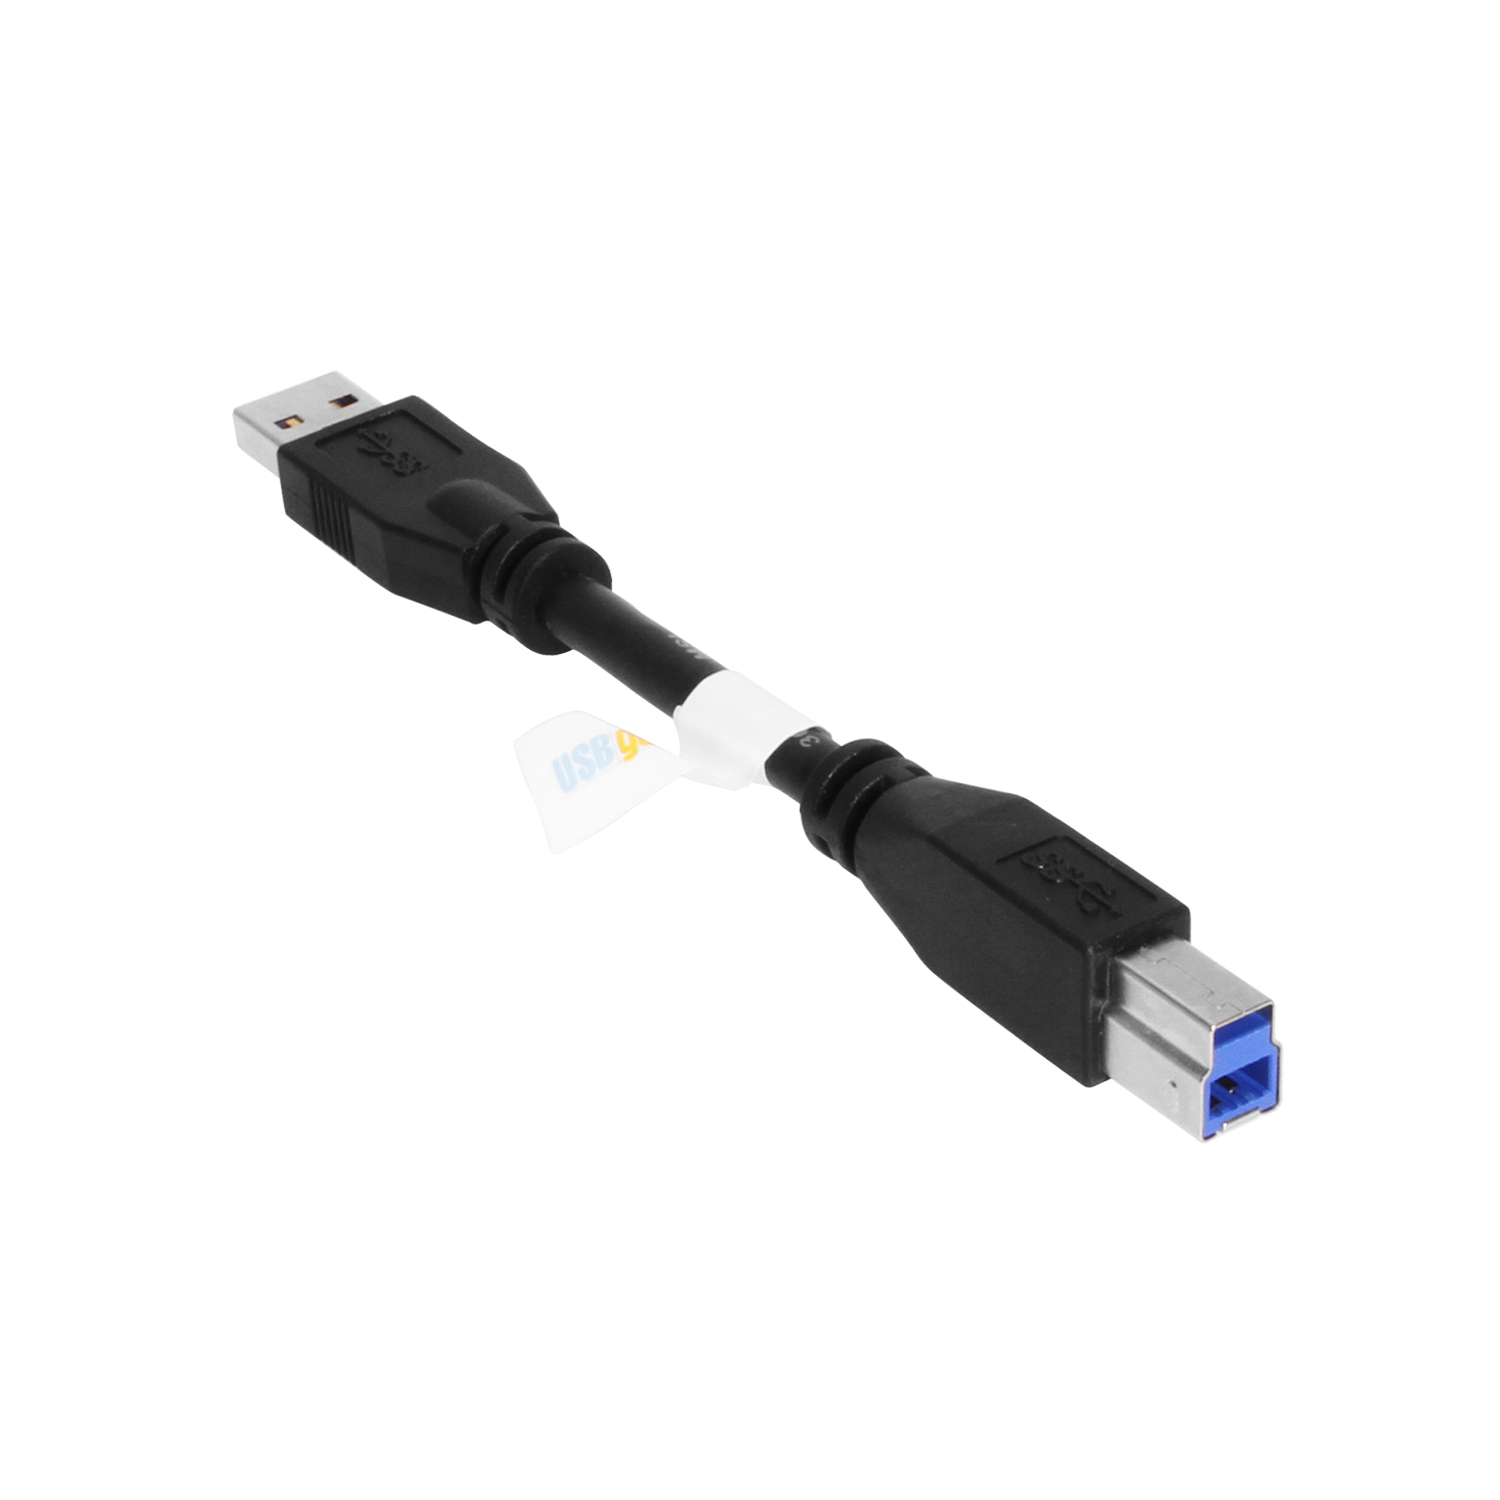 6in USB 3.2 Gen 1 Type-A SuperSpeed Cable - Coolgear